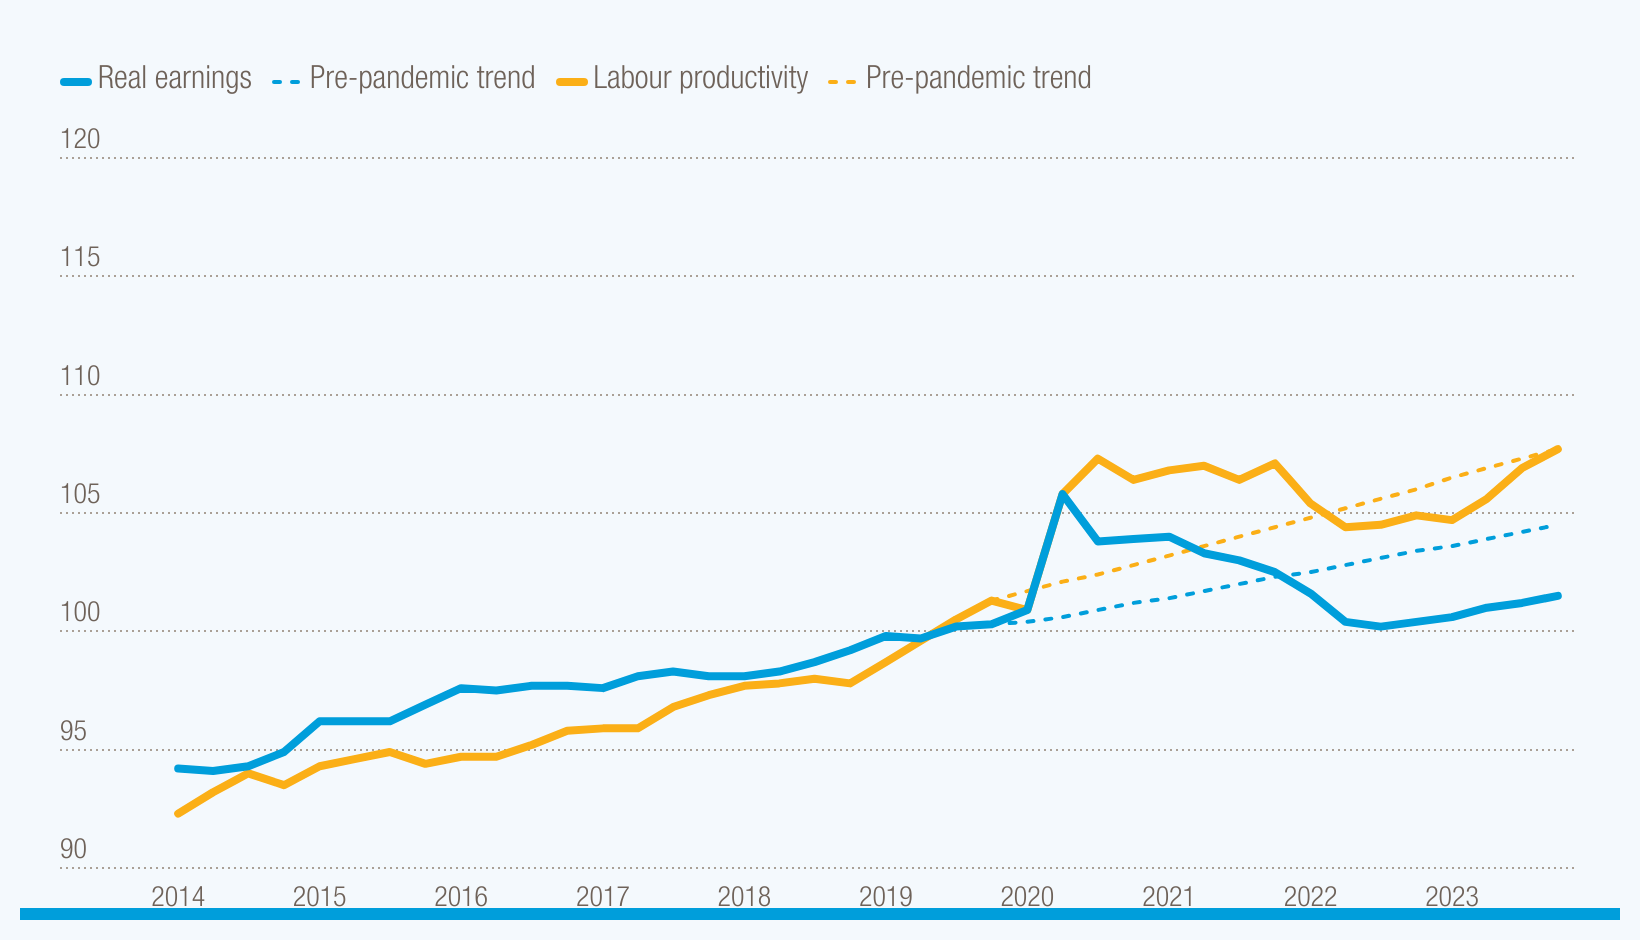 Real wages struggle to return to pre-pandemic trends and keep pace with labour productivity